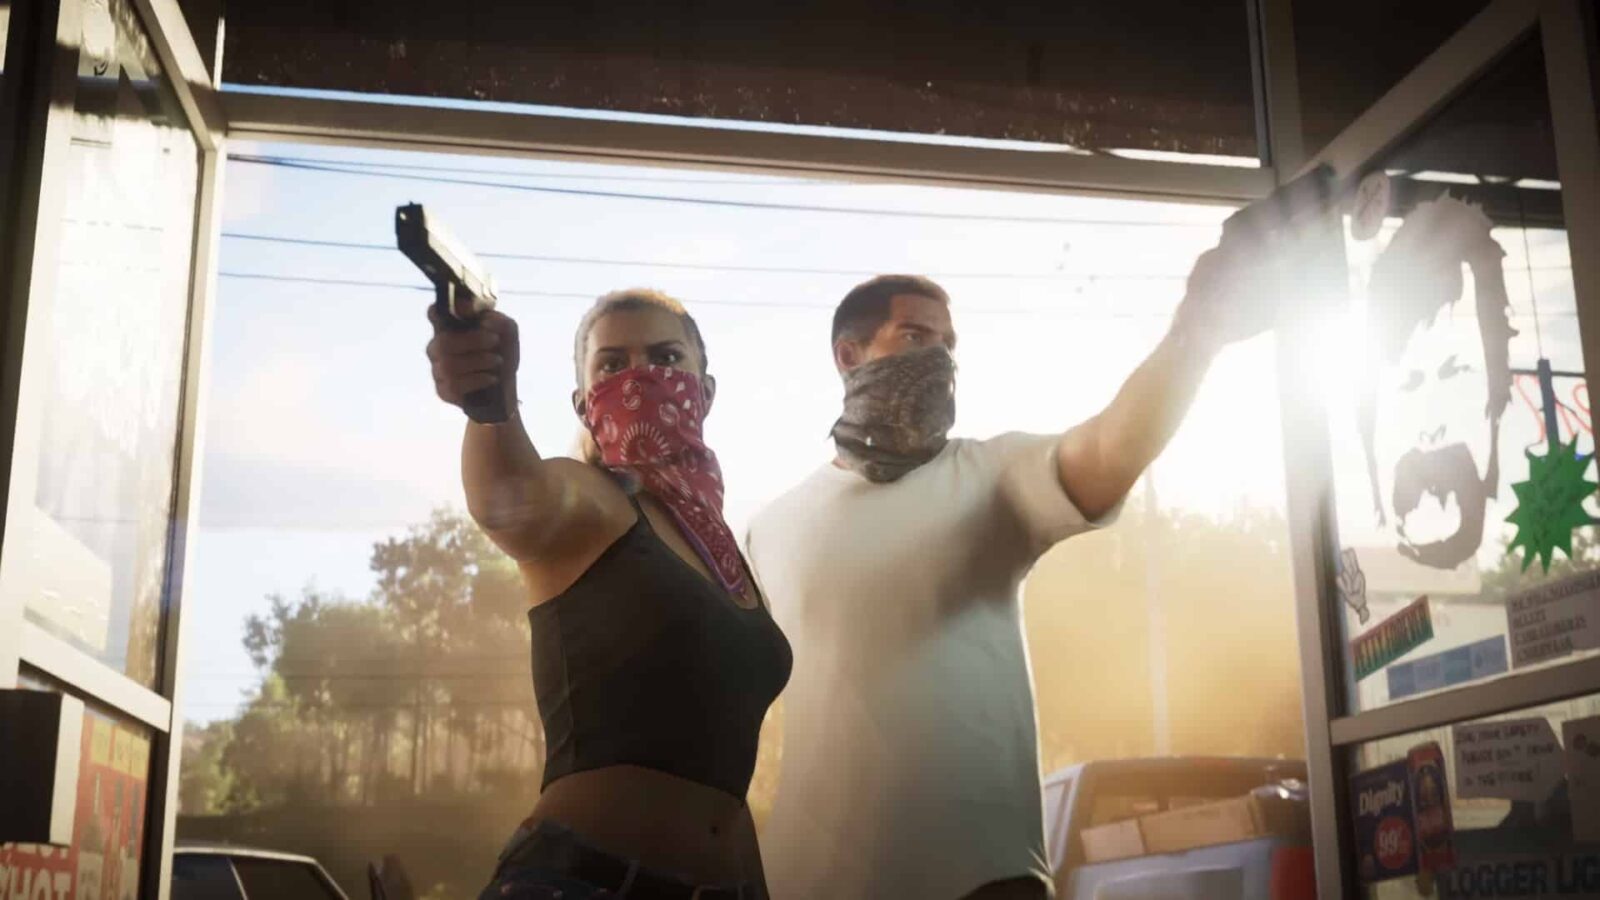 Trailer Grand Theft Auto 6 continues to pulverize records like